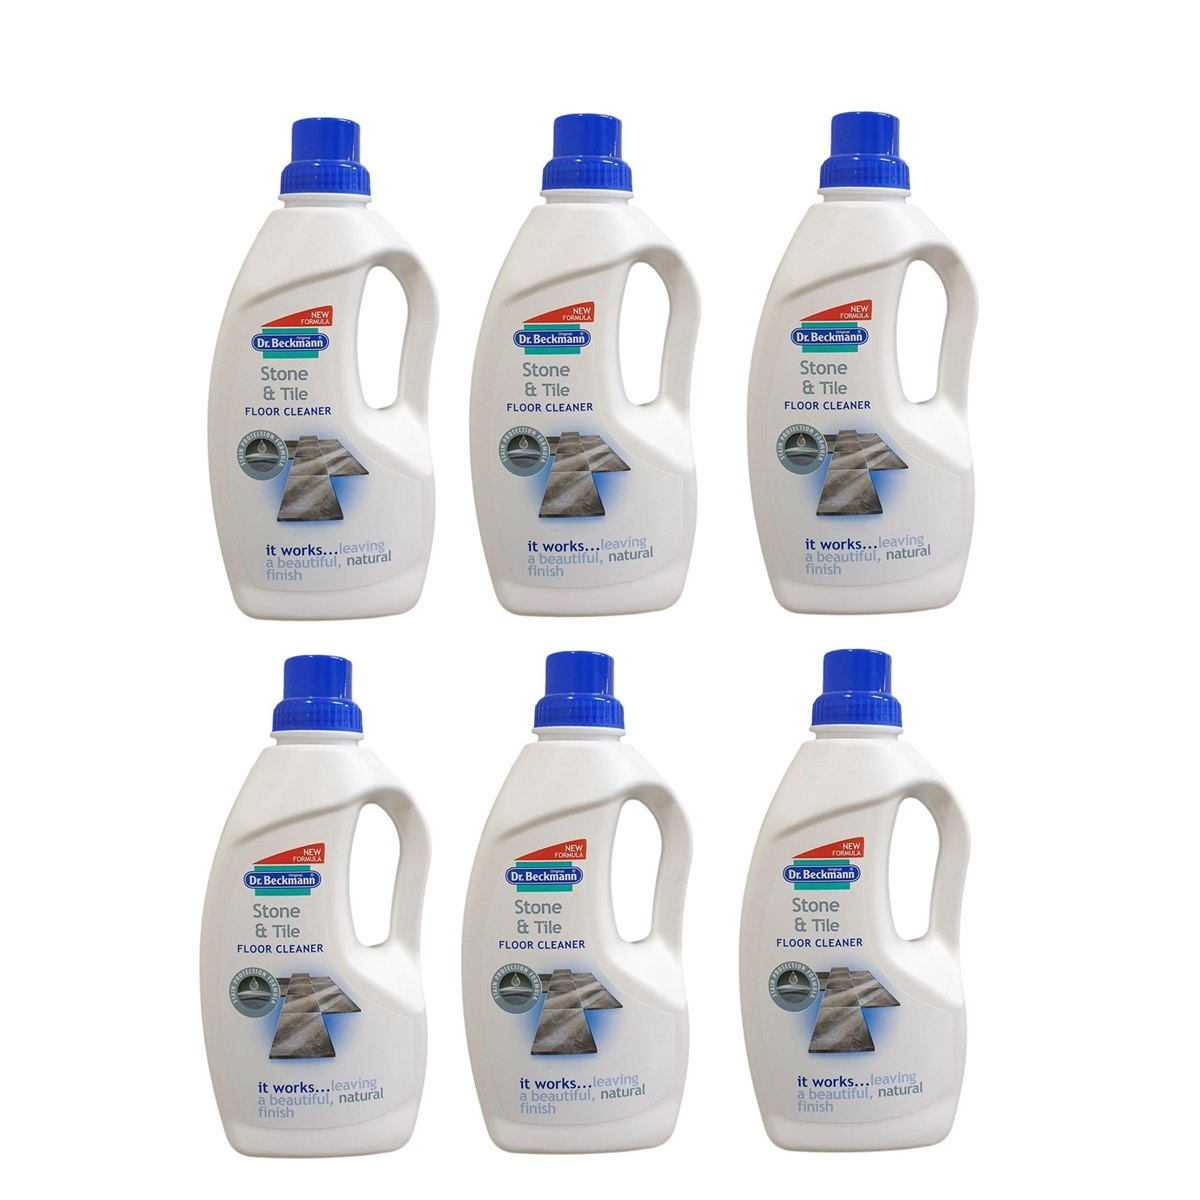 Case of 6 x Dr Beckmann Stone and Tile Floor Cleaner 1 Litre